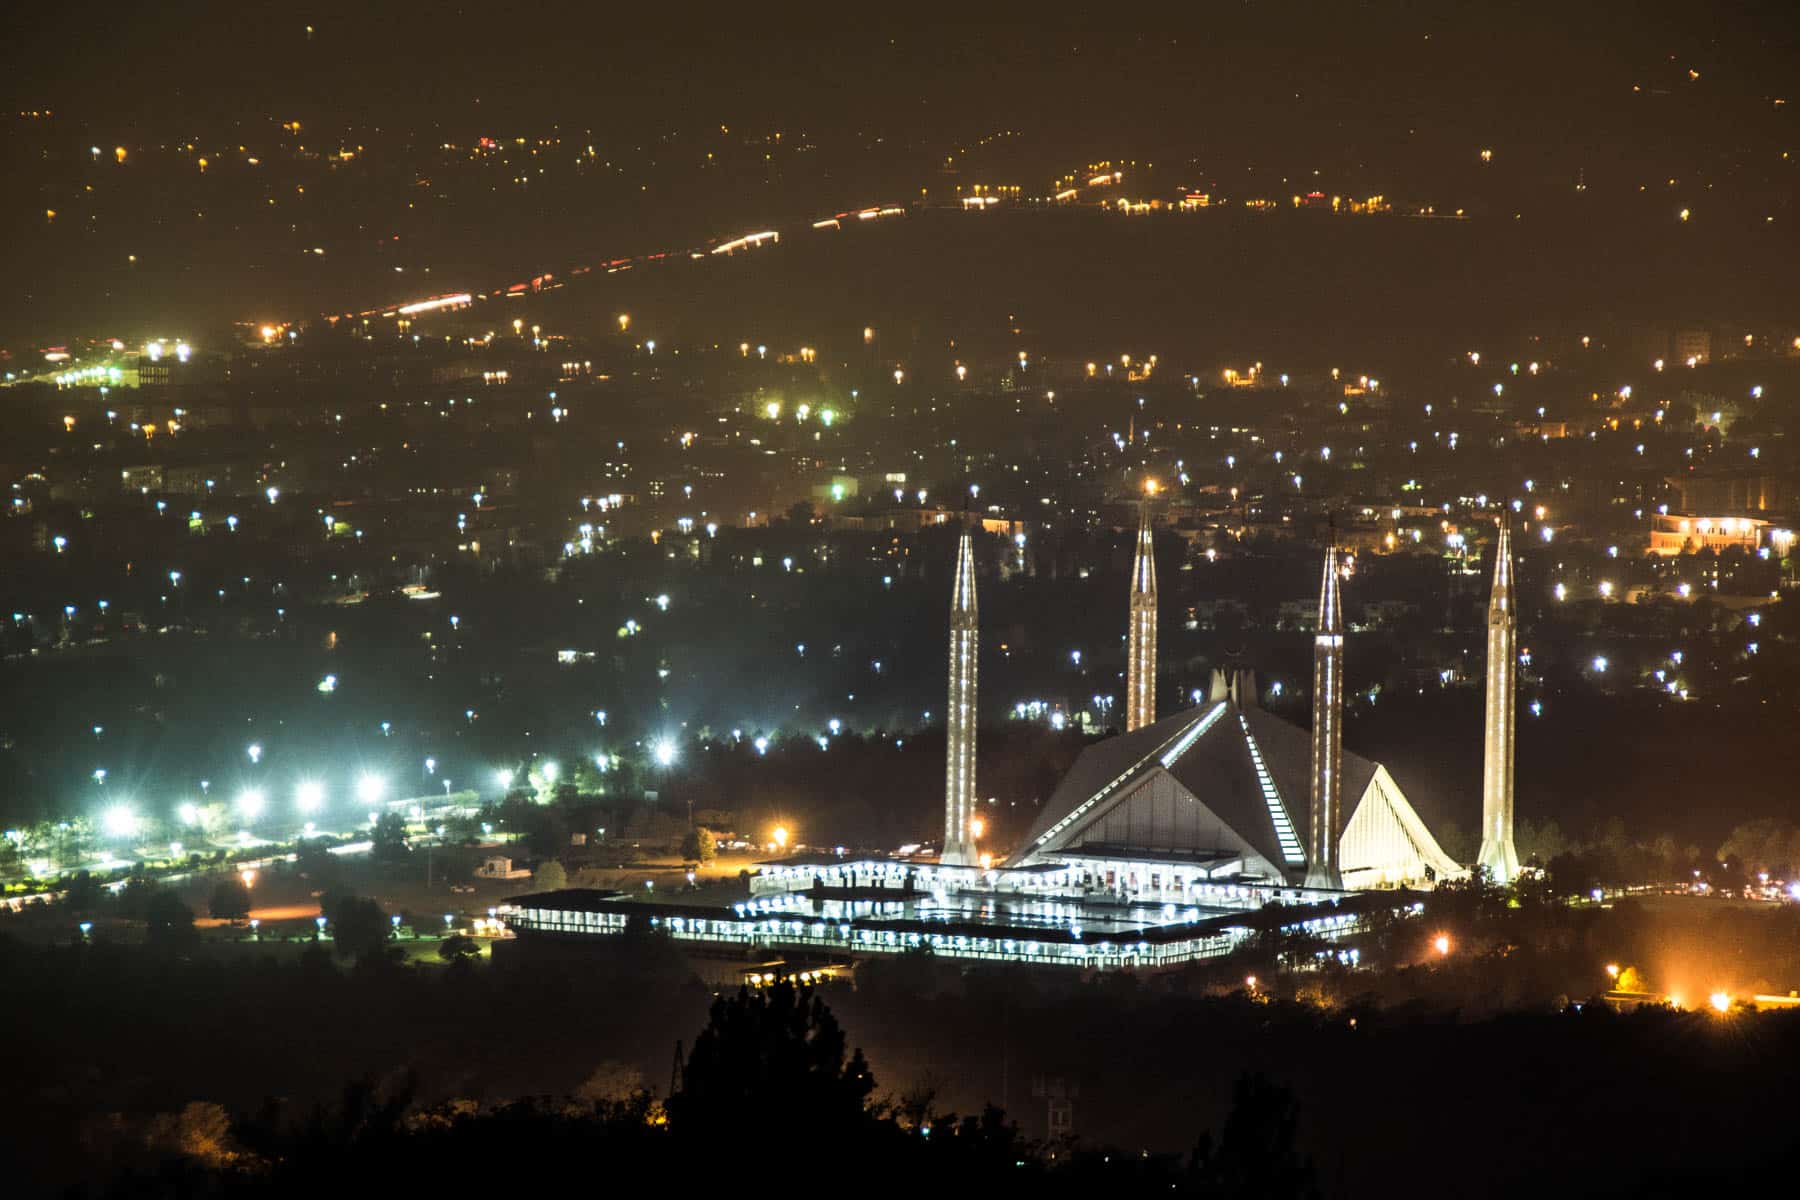 Islamabad, Pakistan from above at night